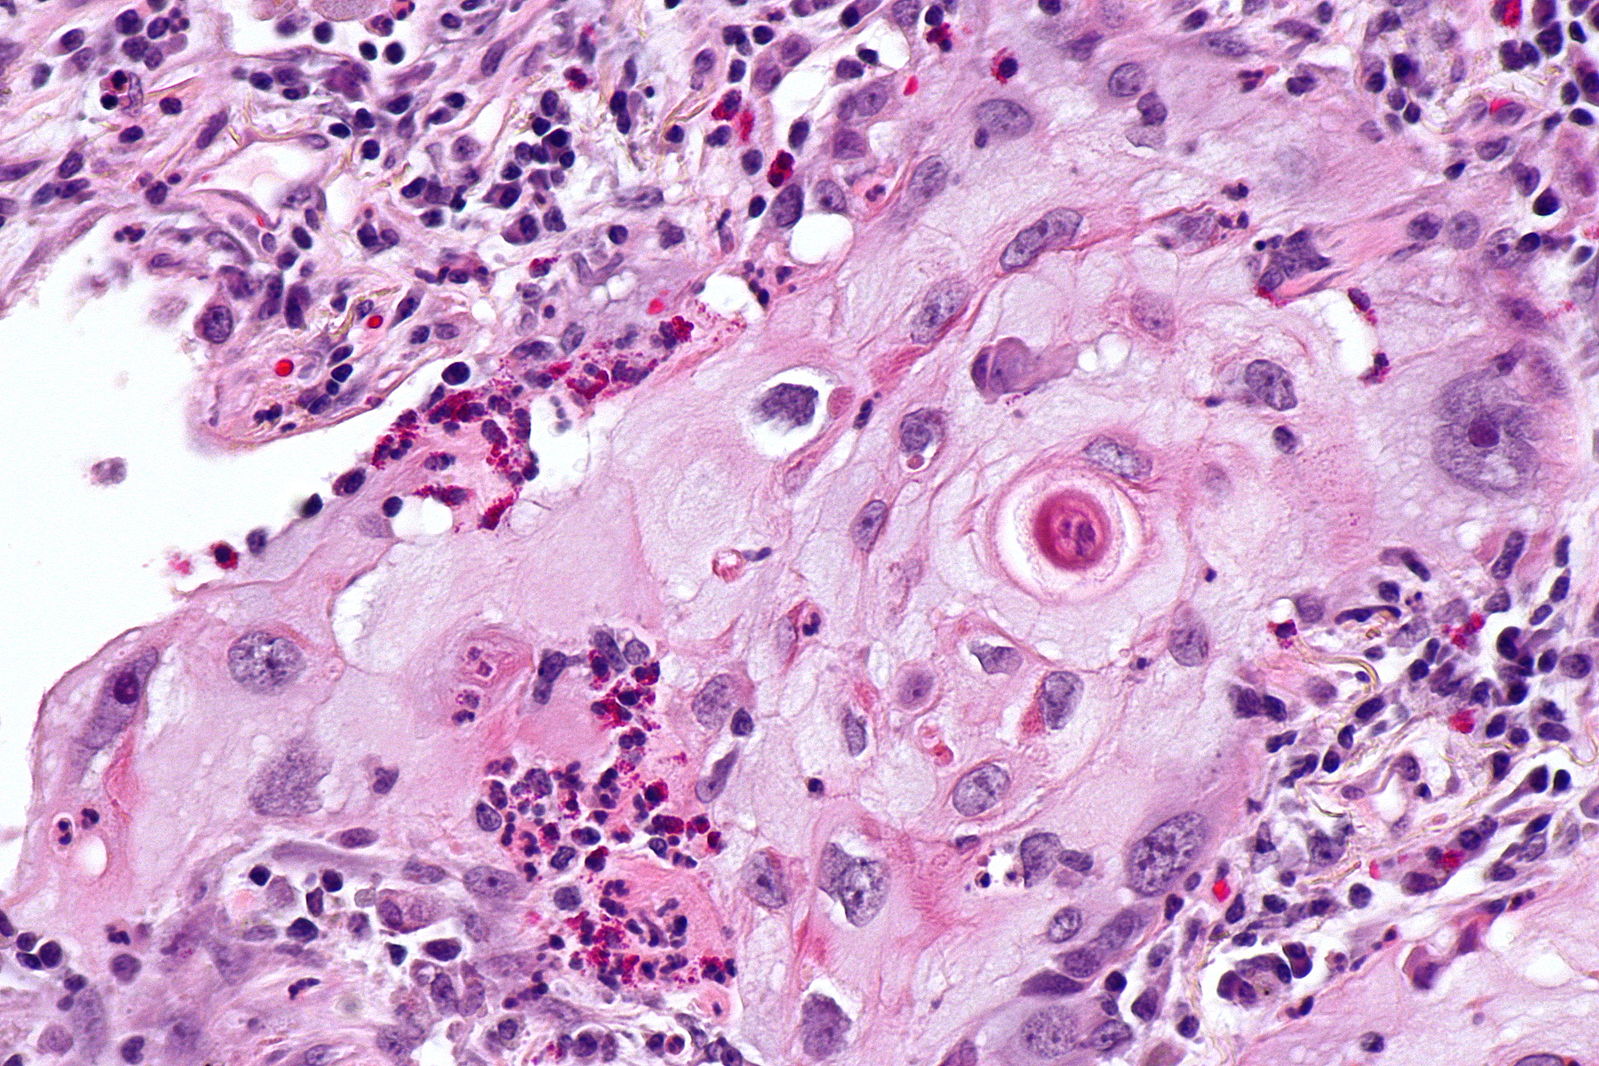 Micropathology: Squamous cell carcinoma of the lung. H&E stain